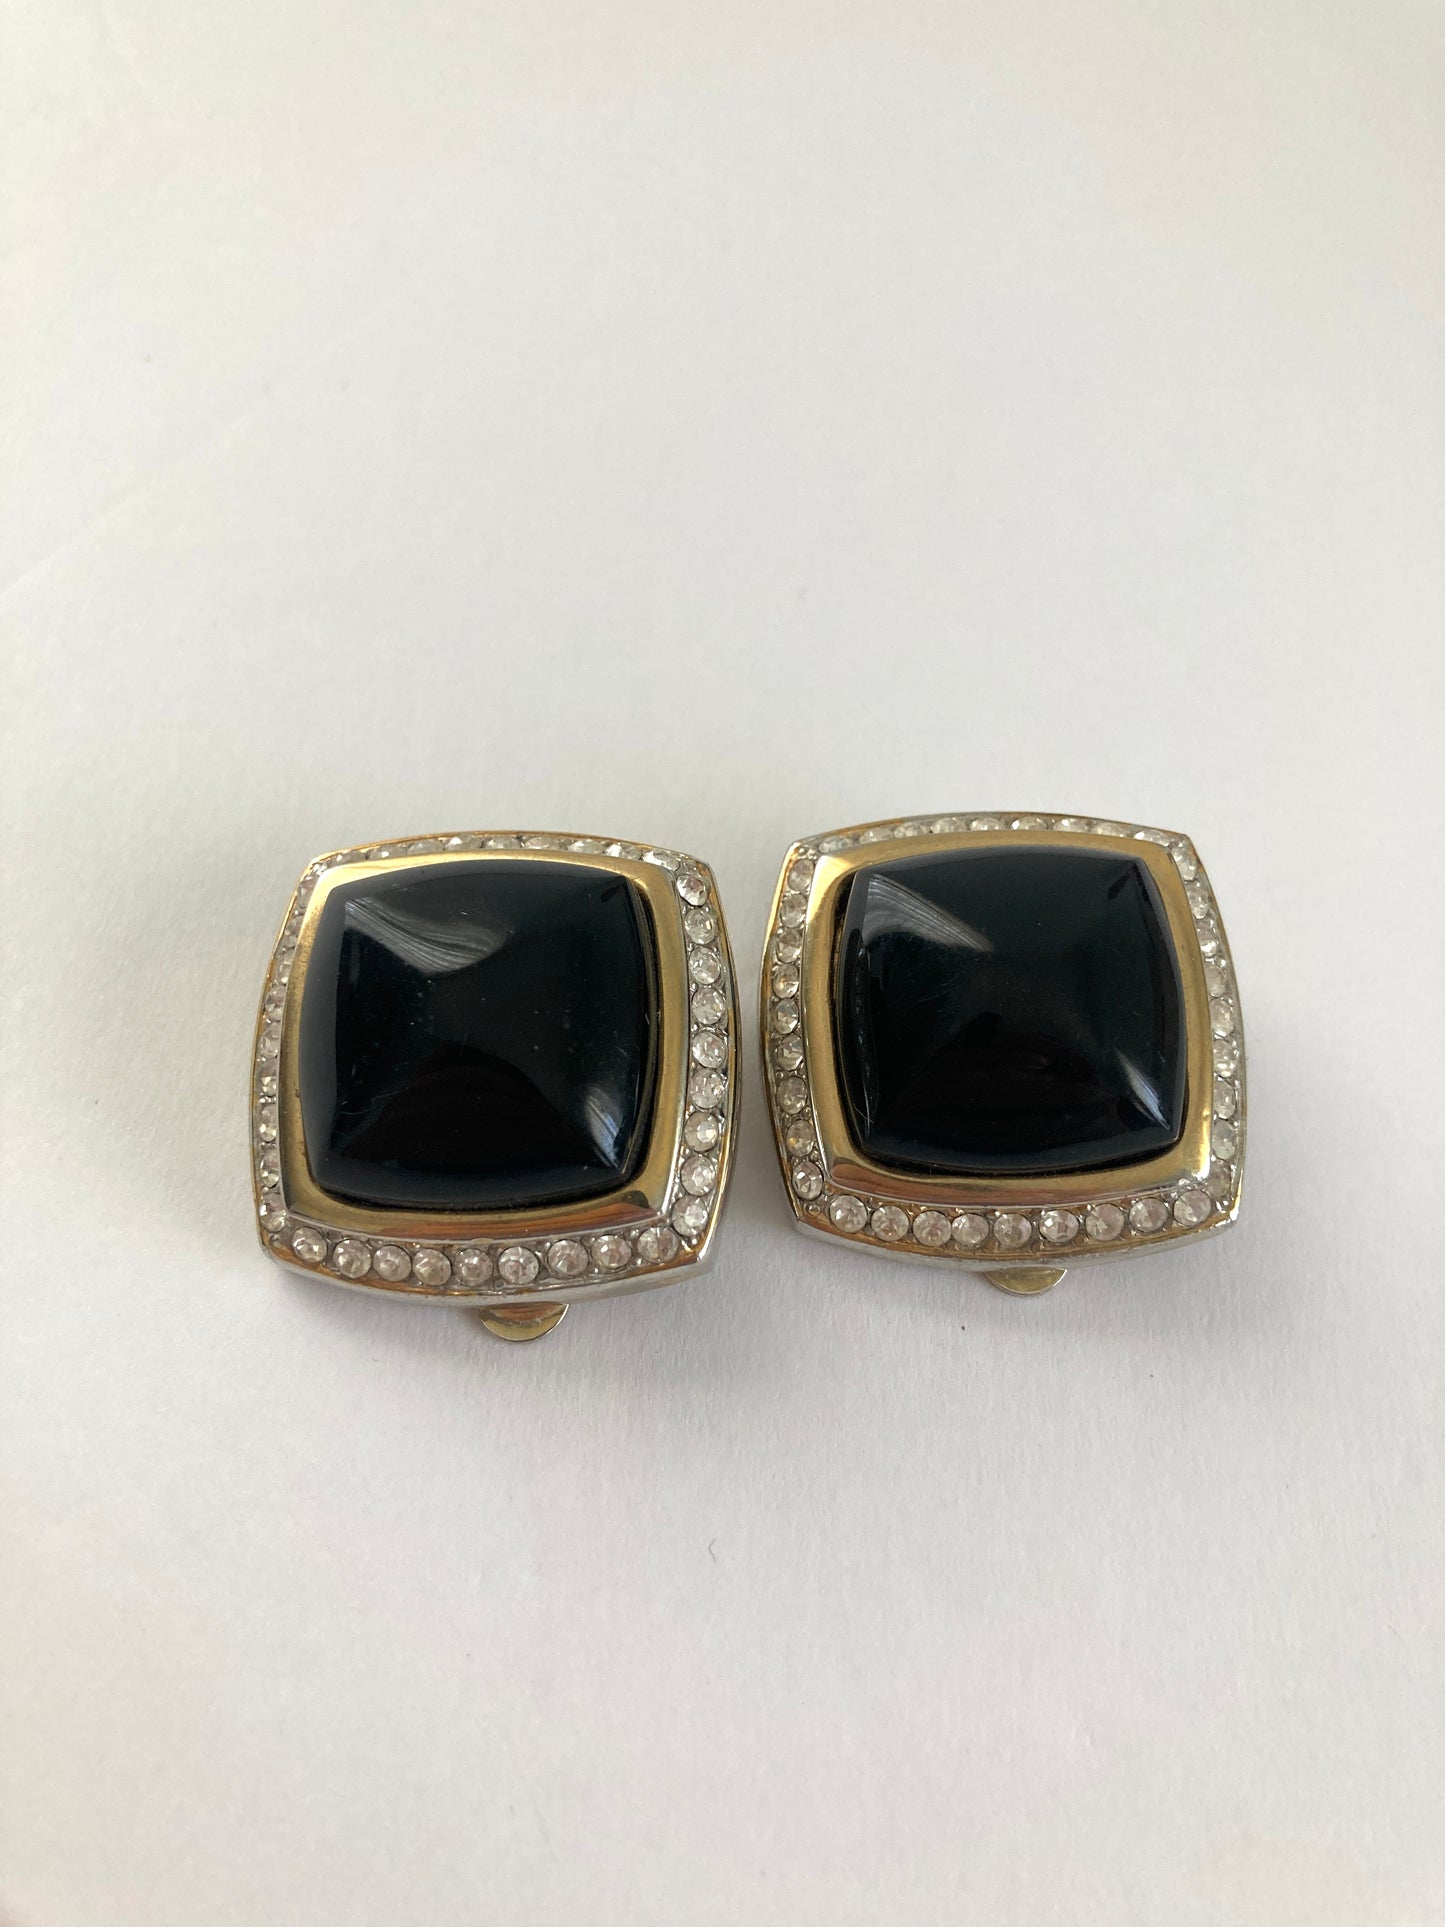 Big Bold Hollywood Regency Earrings in Black and Gold